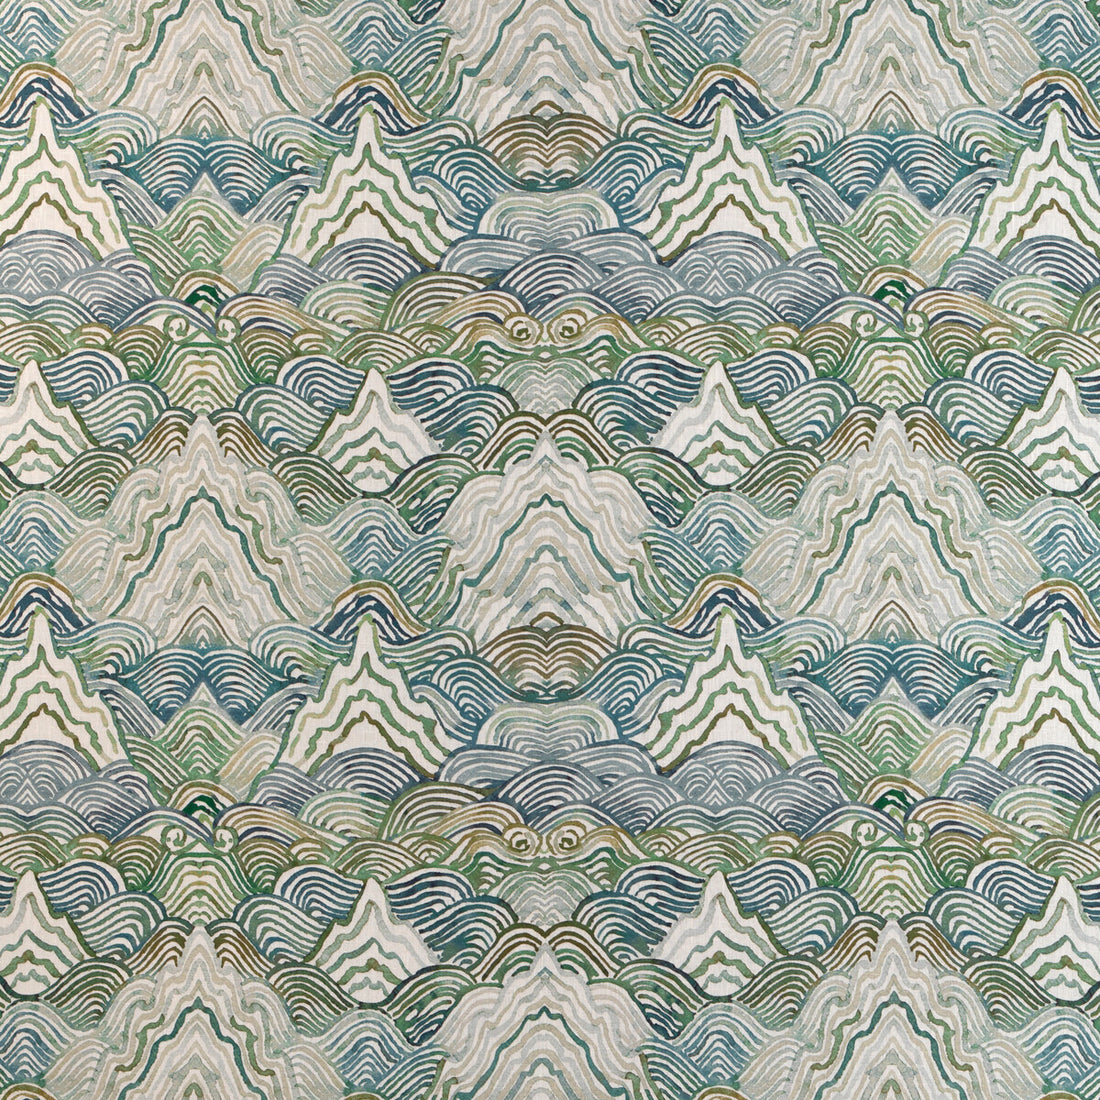 Shangri La fabric in verde color - pattern SHANGRI LA.3.0 - by Kravet Couture in the Casa Botanica collection